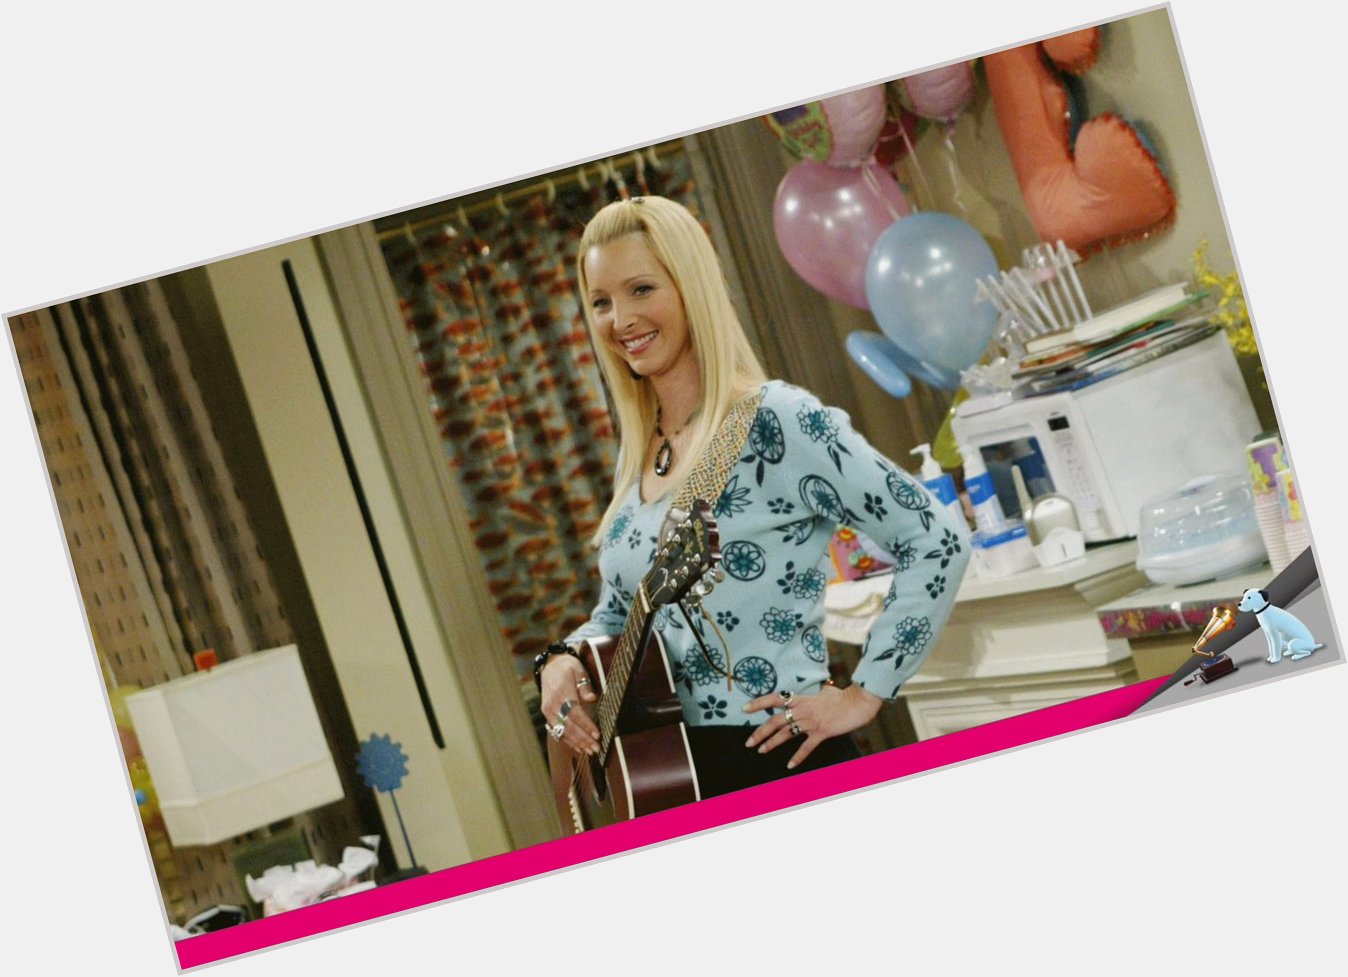 Happy 55th Birthday Lisa Kudrow! 

What\s your favourite Phoebe Buffay moment from 